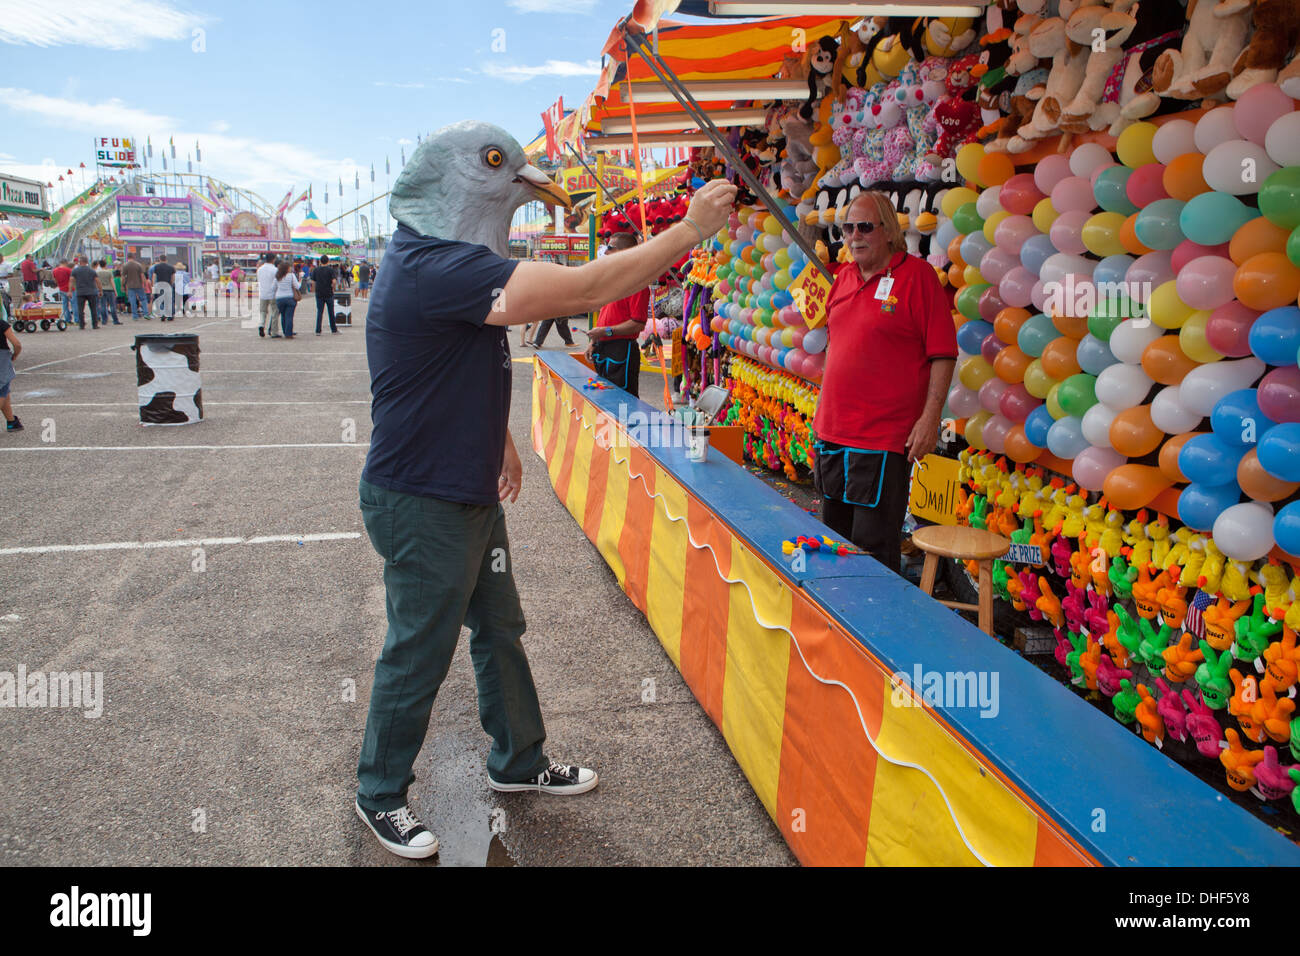 Man wearing pigeon mask aims dart at balloons, New Mexico state fair. Stock Photo